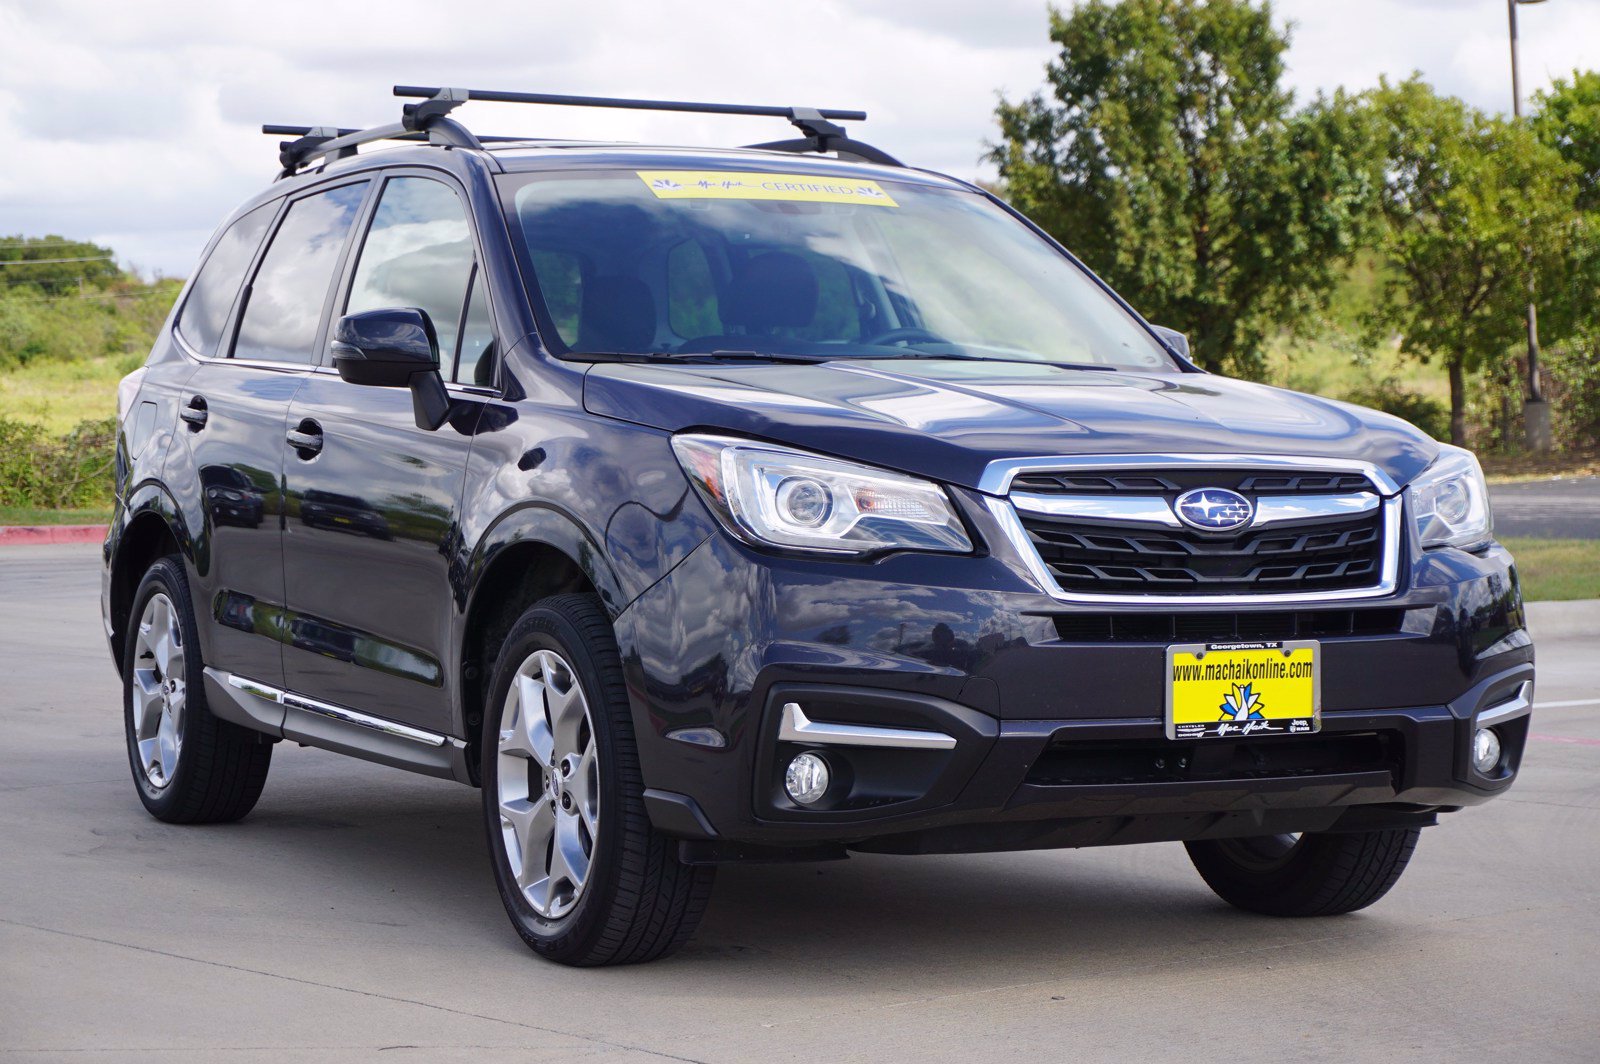 PreOwned 2018 Subaru Forester Touring With Navigation & AWD